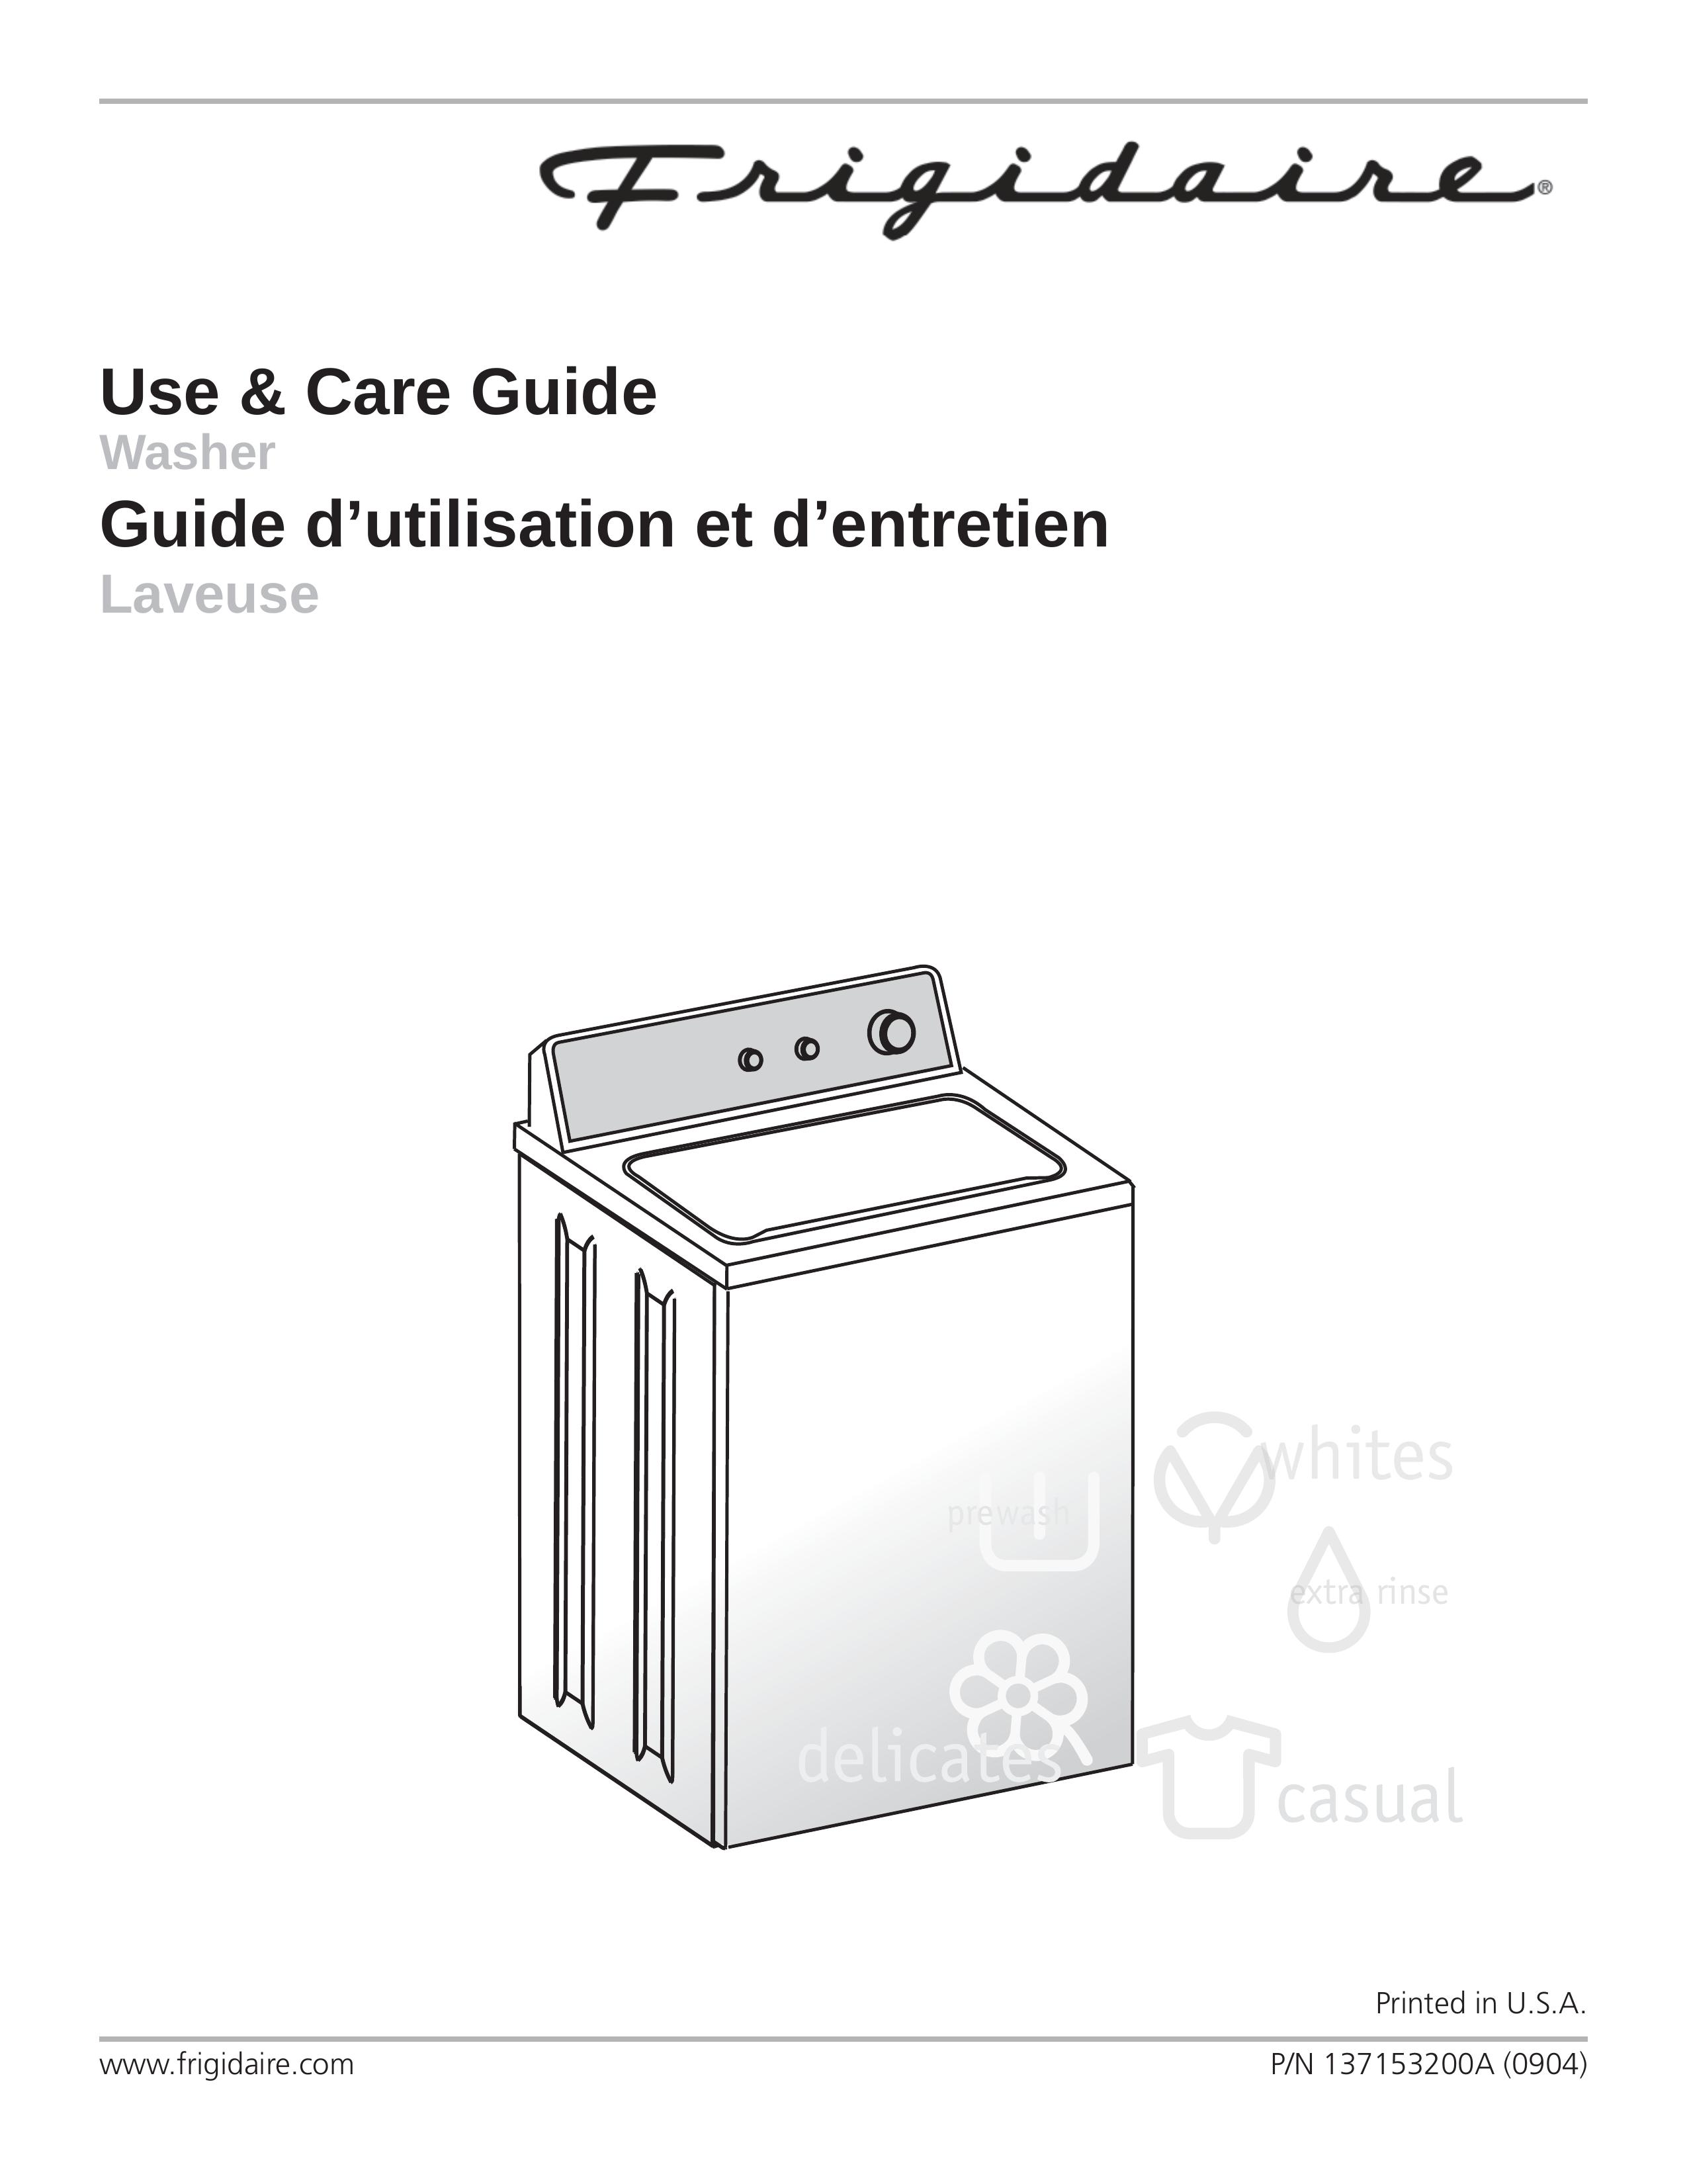 Frigidaire 137153200A Washer User Manual